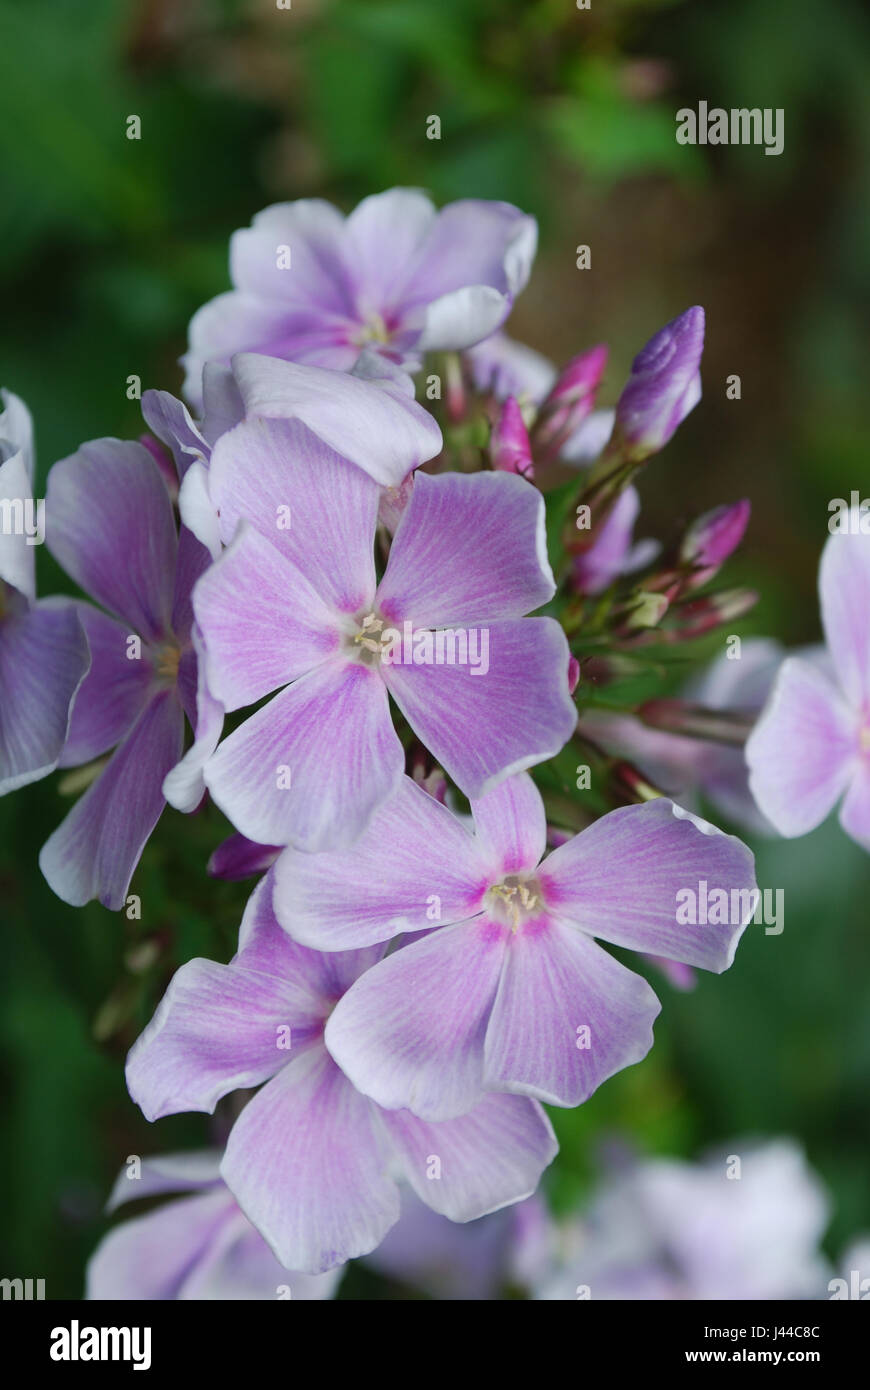 Blooming pale pink phlox flowers in a garden. Stock Photo